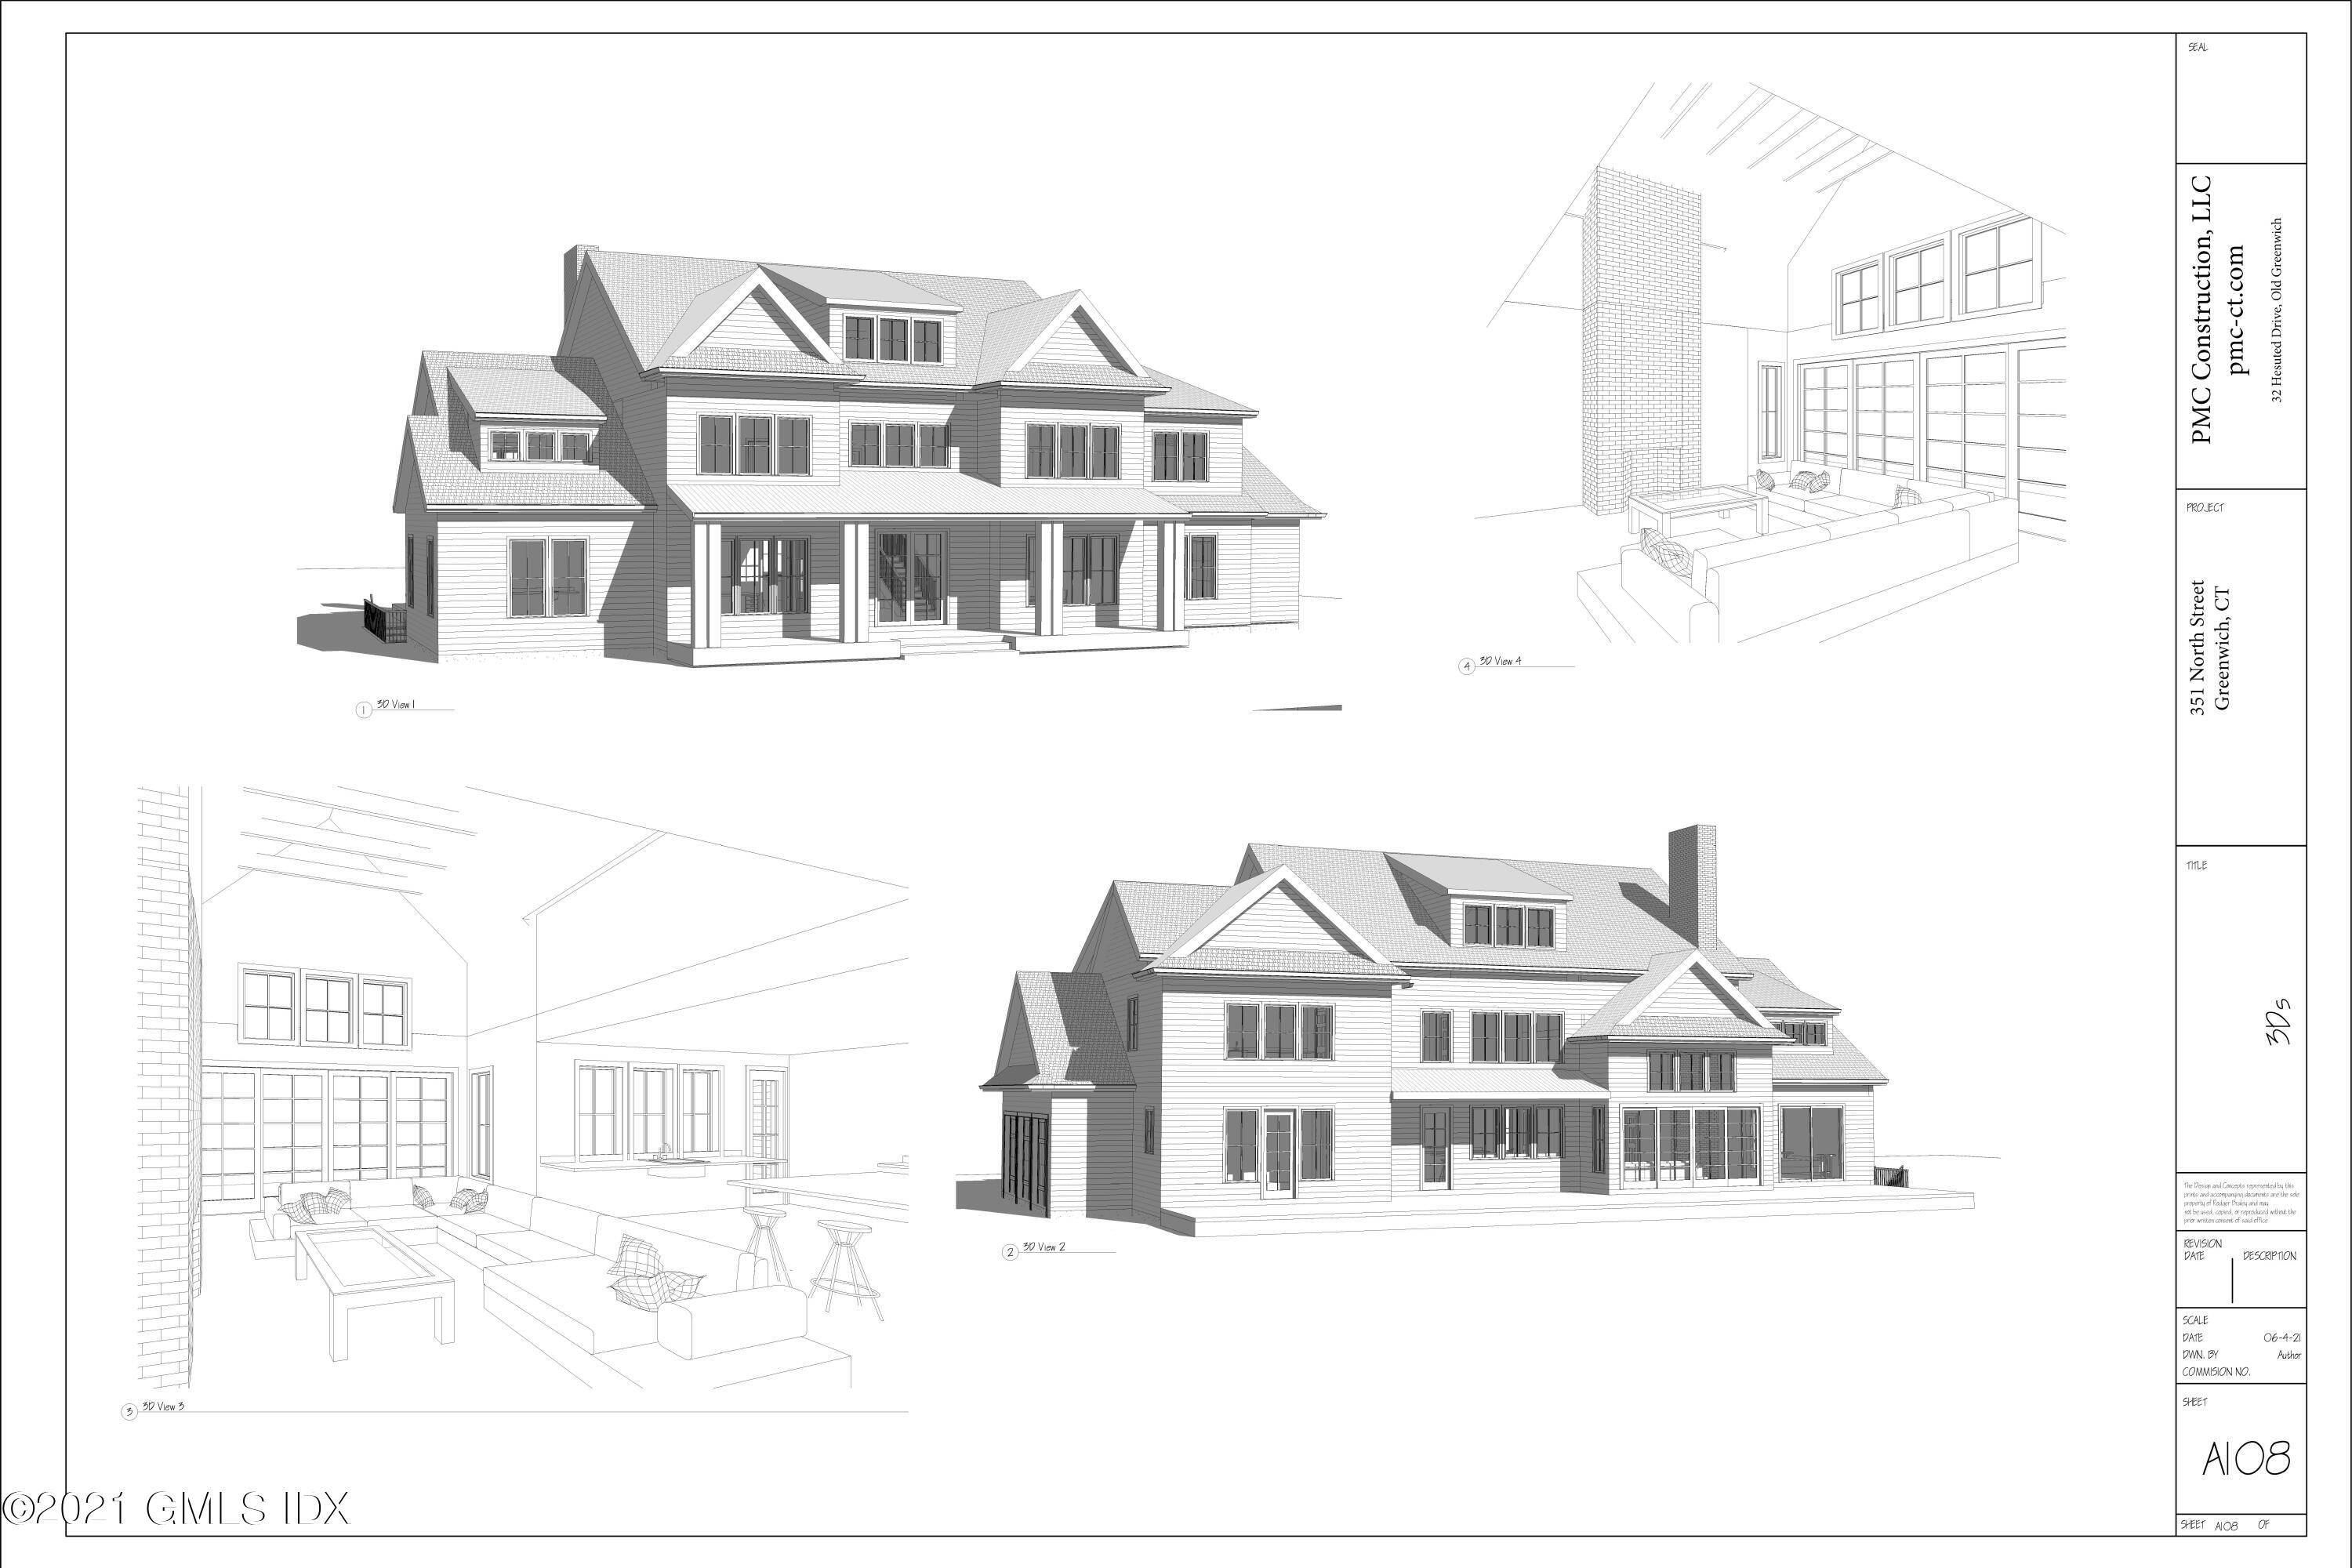 Proposed new construction 6, 000 sq ft home on prime level 1 acre lot to be built by PMC Construction LLC pmc ct.